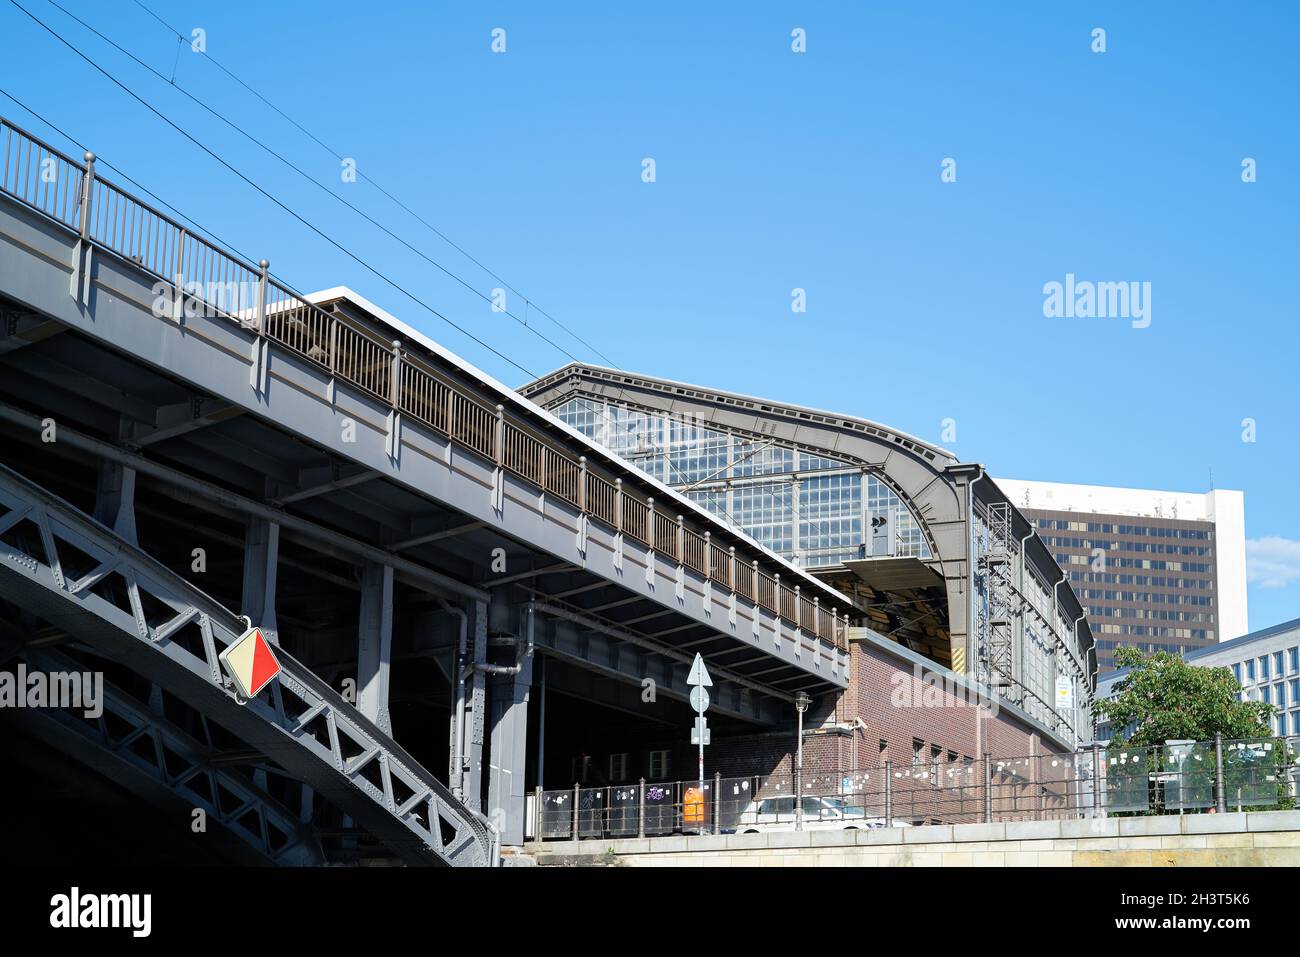 The historic train station Friedrichstrasse in Berlin also called the Palace of Tears Stock Photo